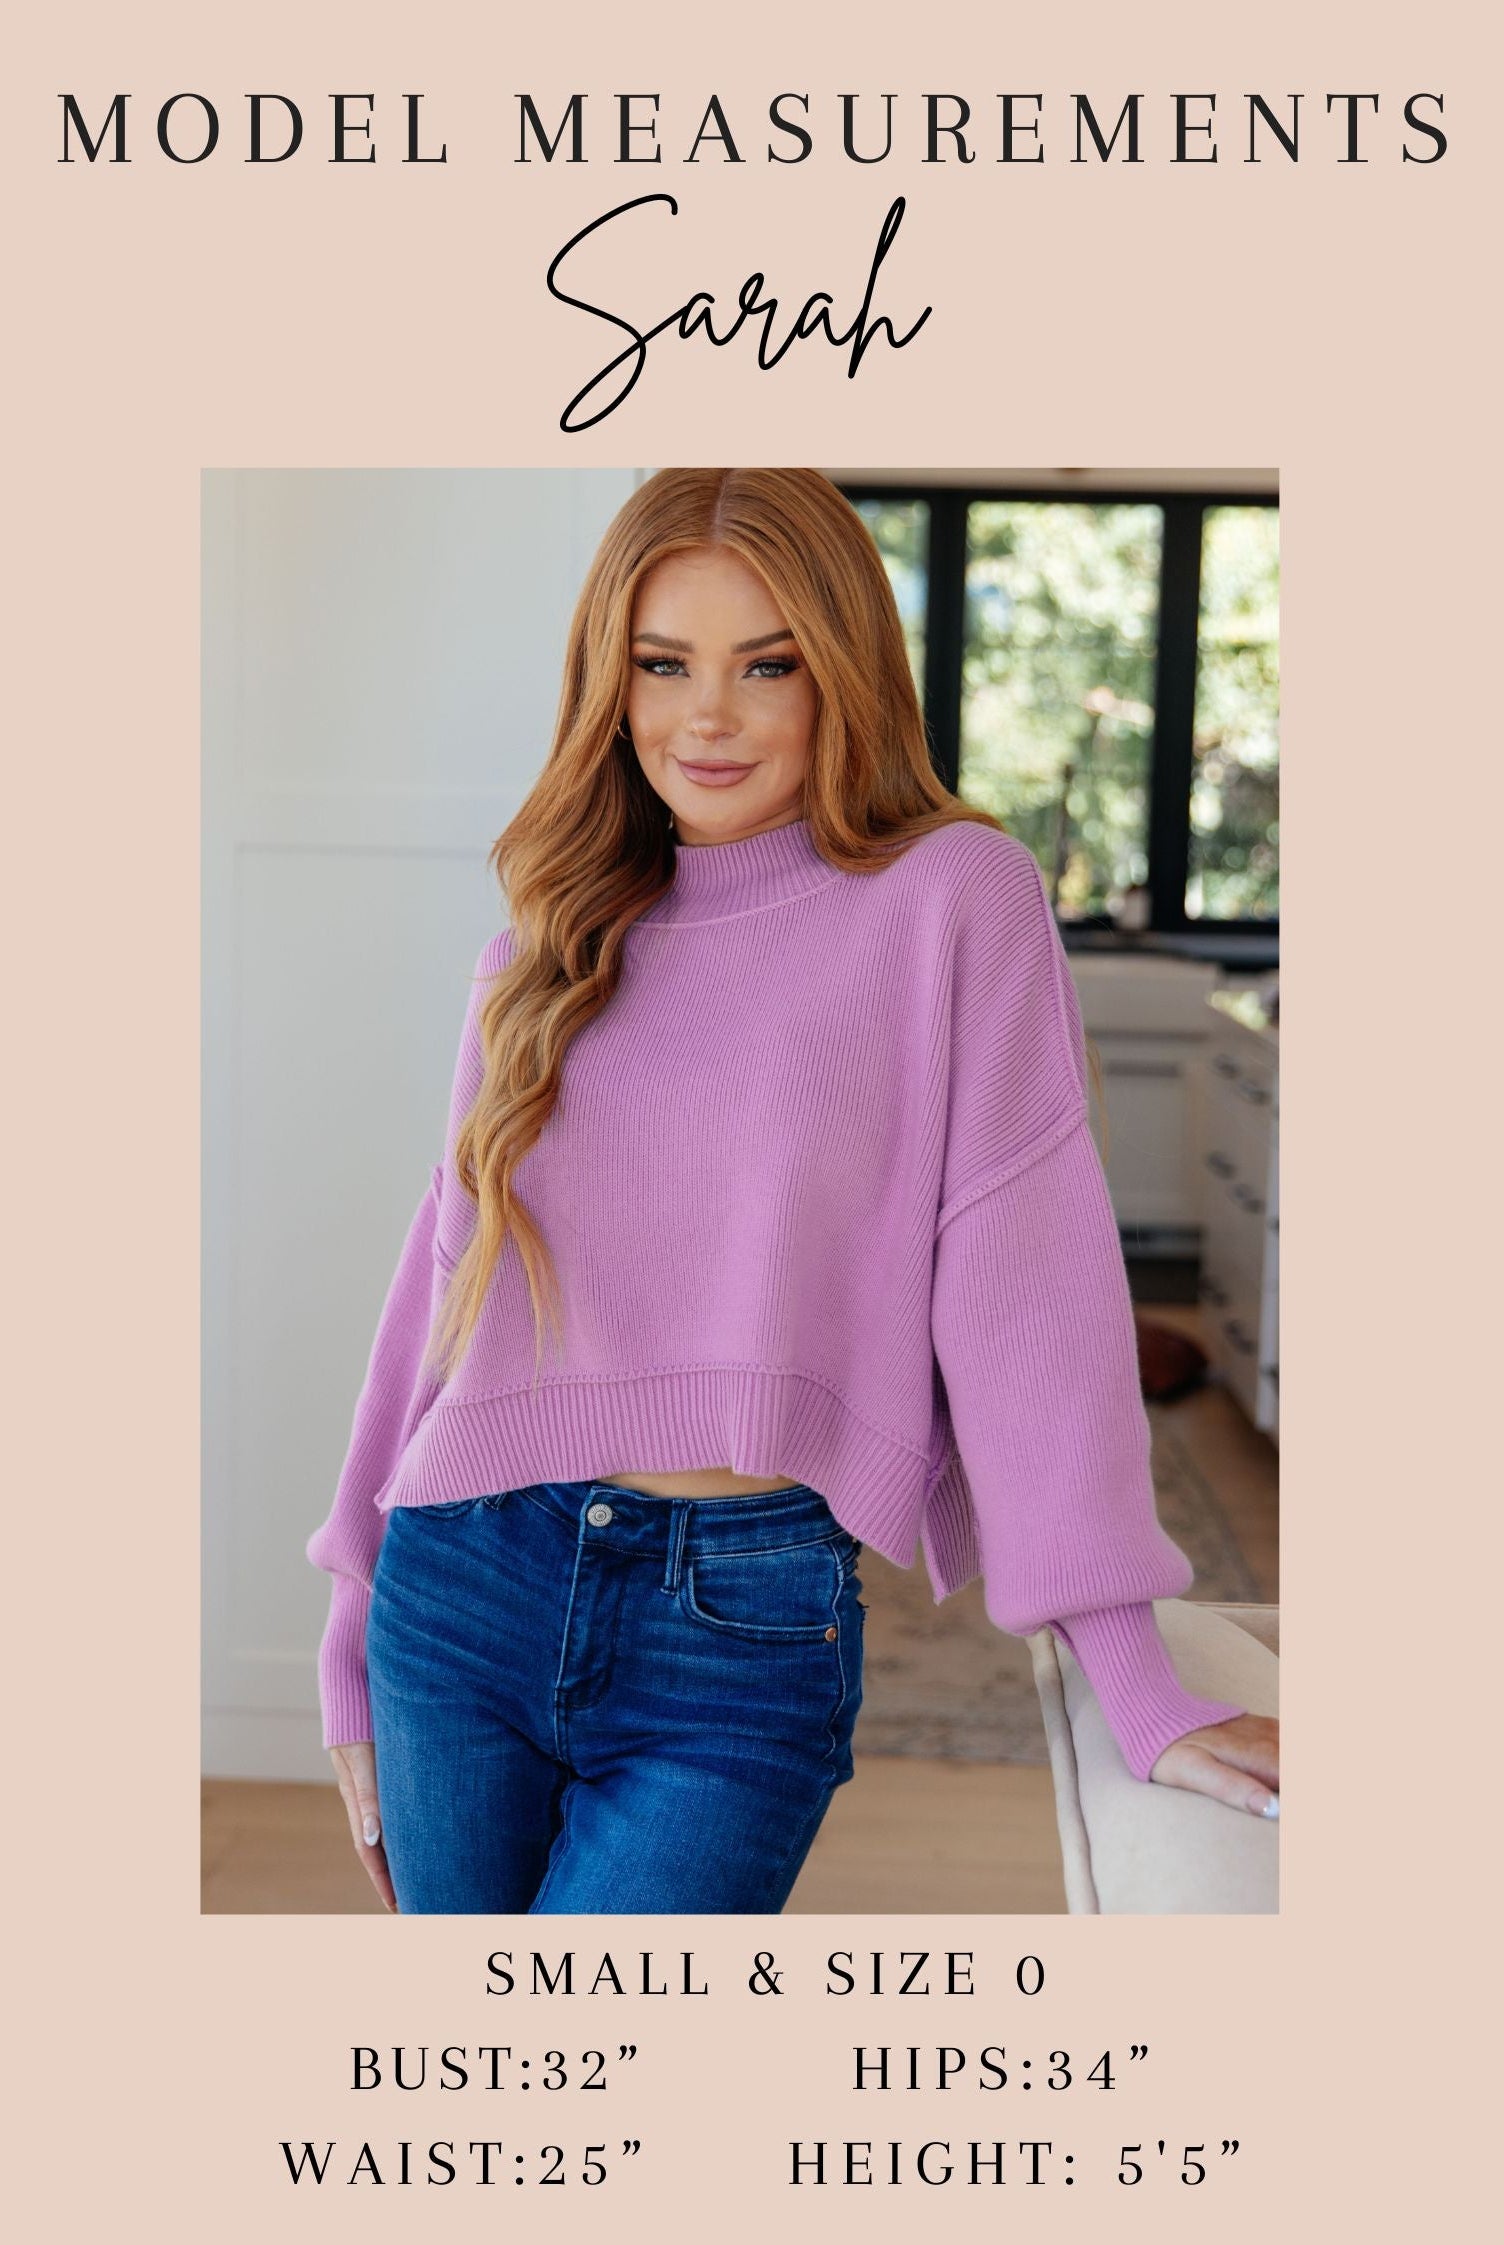 Last Minute Get Together Sweater-Sweaters-Krush Kandy, Women's Online Fashion Boutique Located in Phoenix, Arizona (Scottsdale Area)